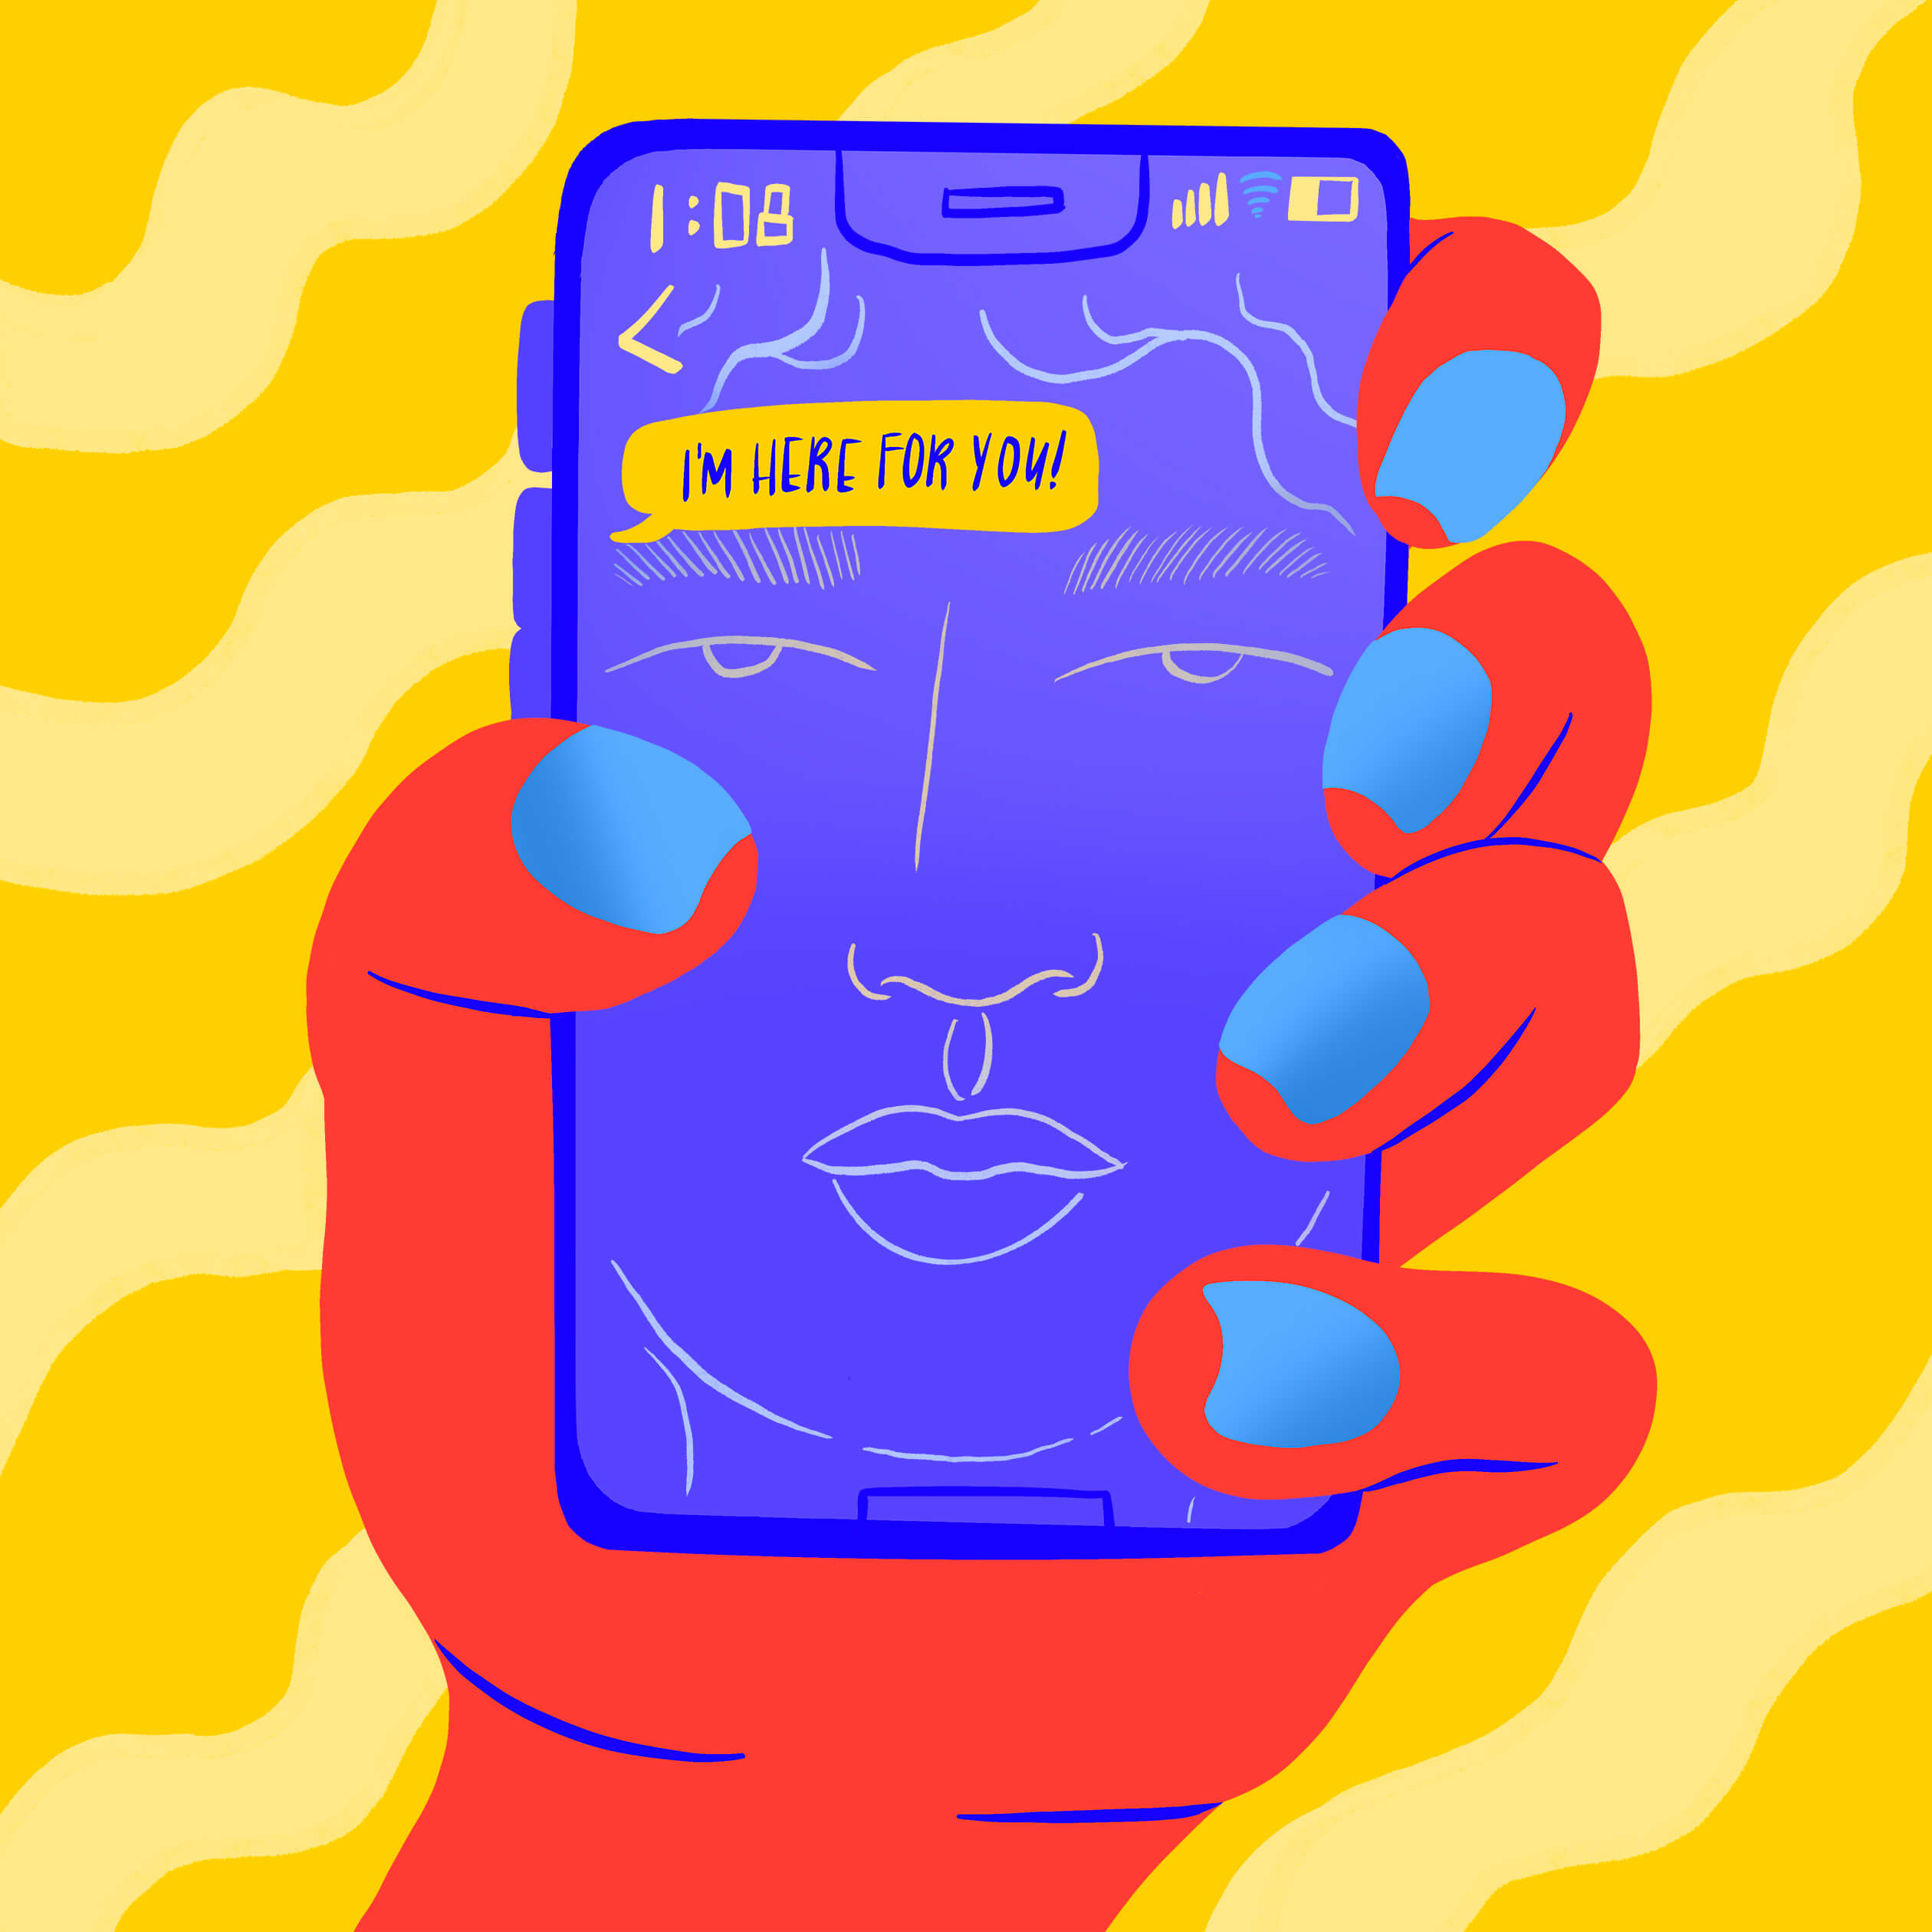 Illustration of a hand holding a phone, showing an incoming text that says, "I'm here for you!" above the reflection of the person's face